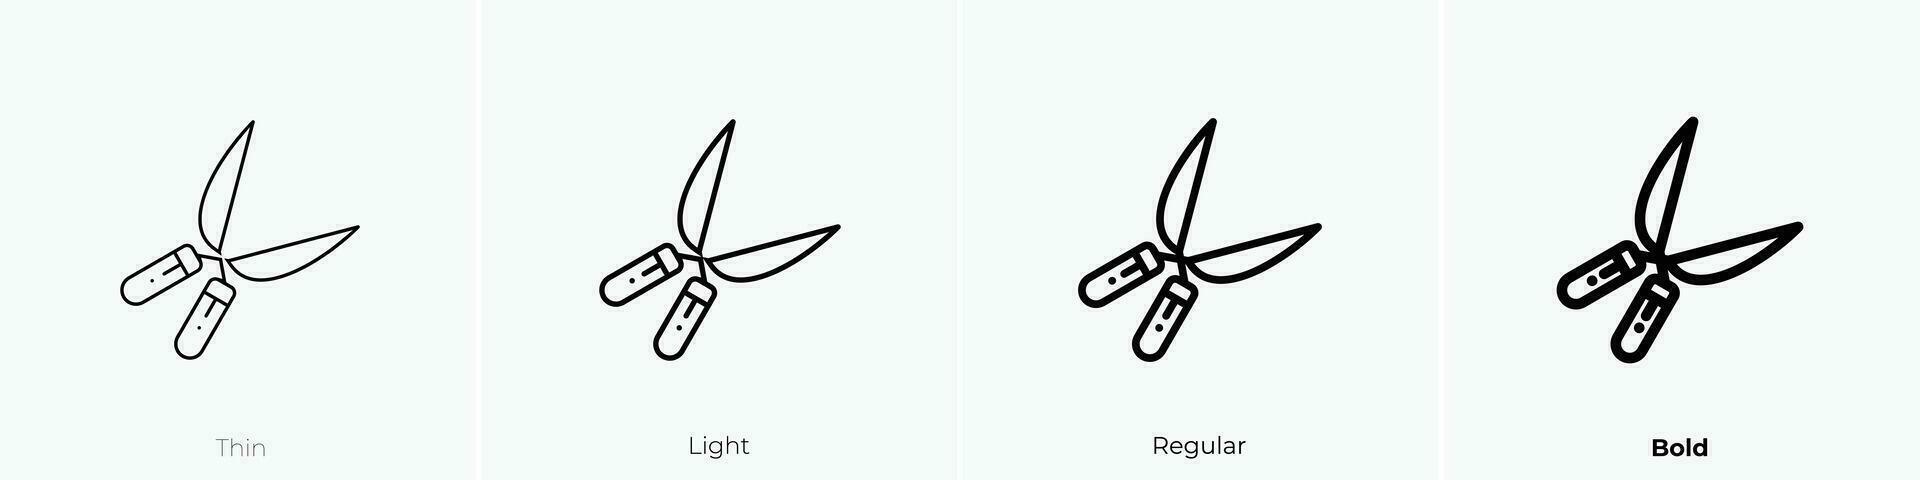 shear icon. Thin, Light, Regular And Bold style design isolated on white background vector